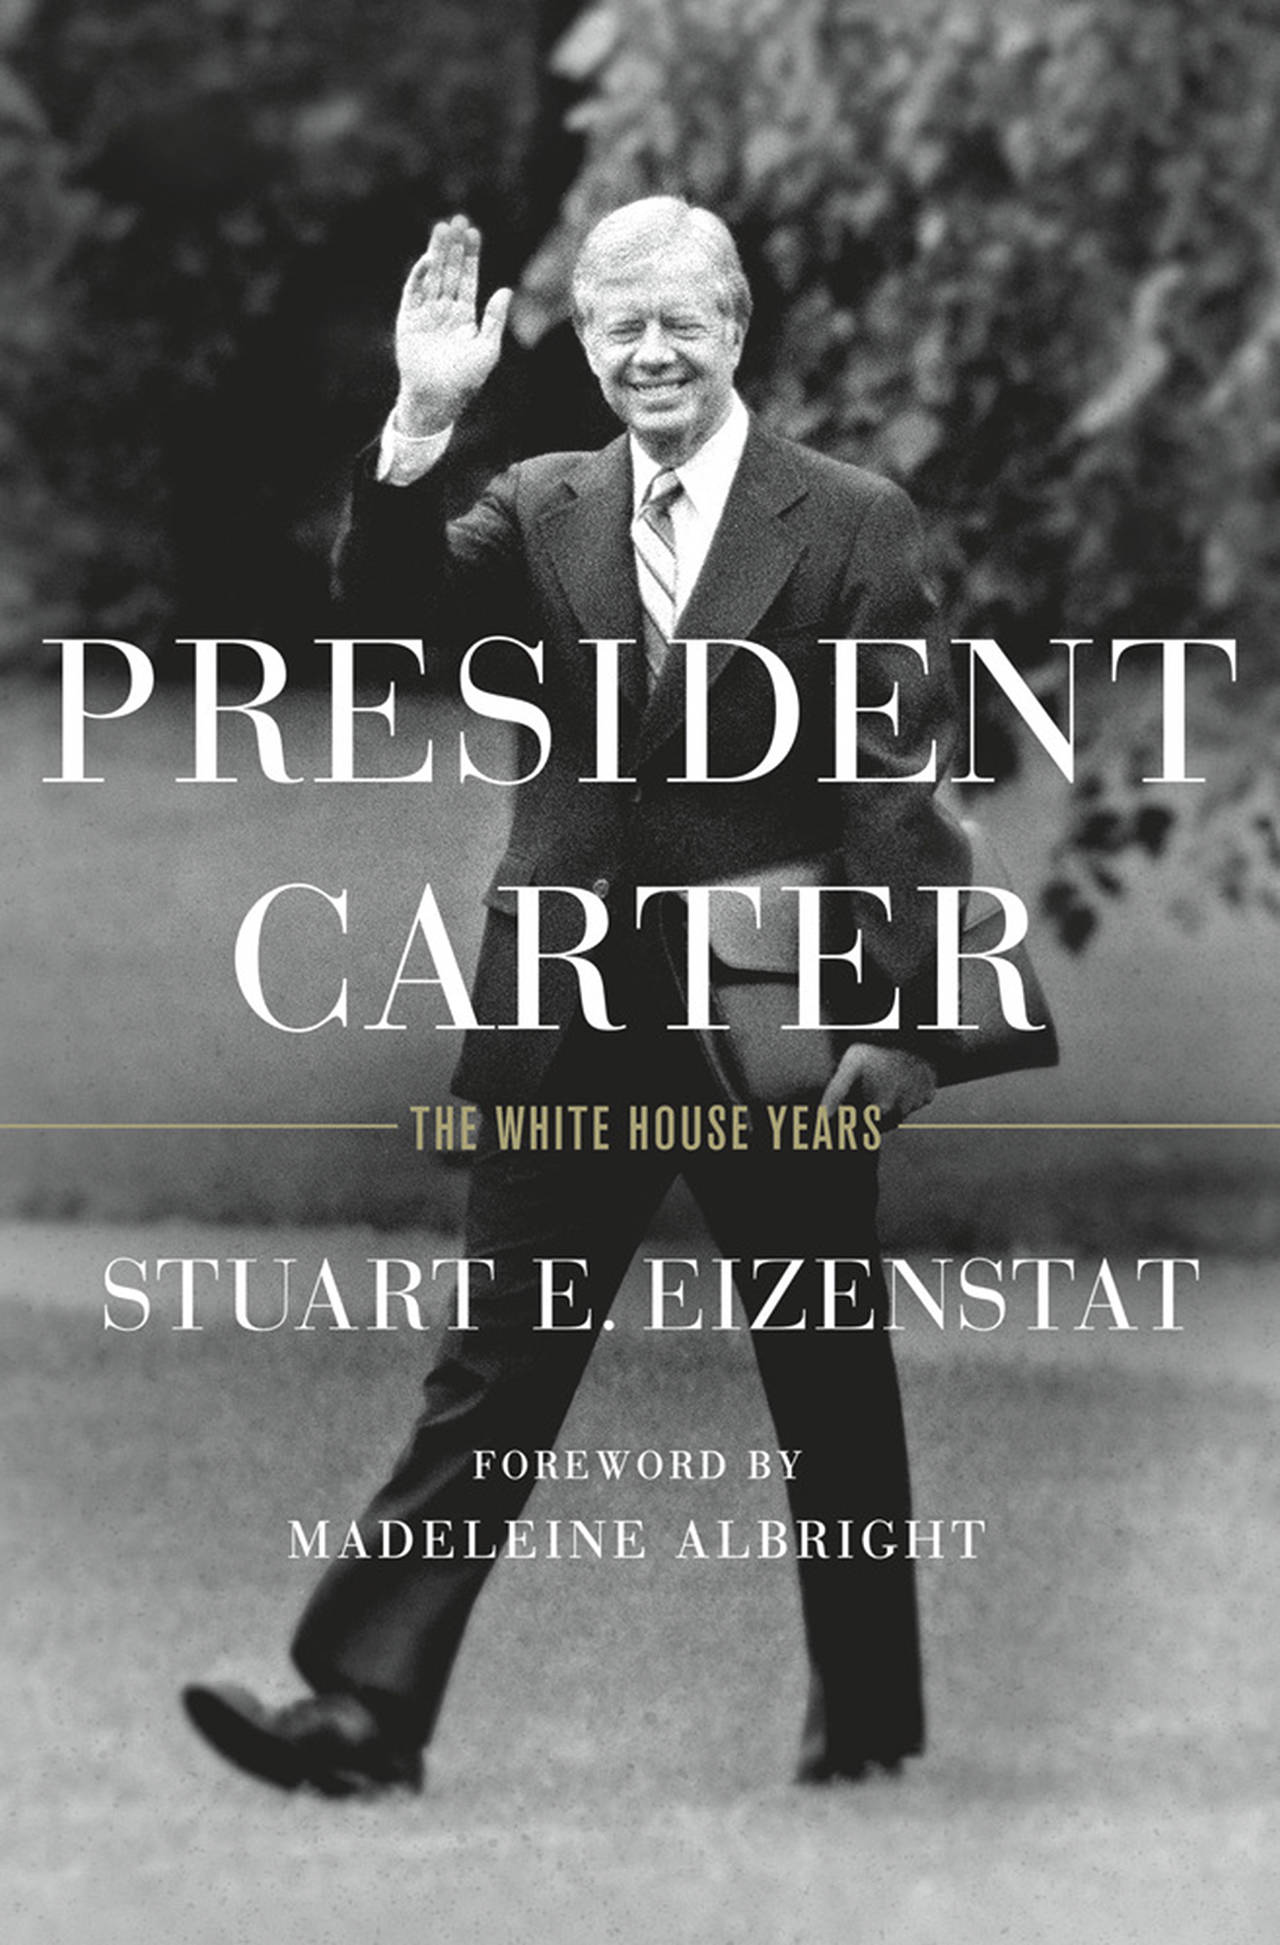 (Macmillan Publishers) “President Carter: The White House Years” by: Stuart E. Eizenstat; St. Martin’s Press (999 pages, $40).